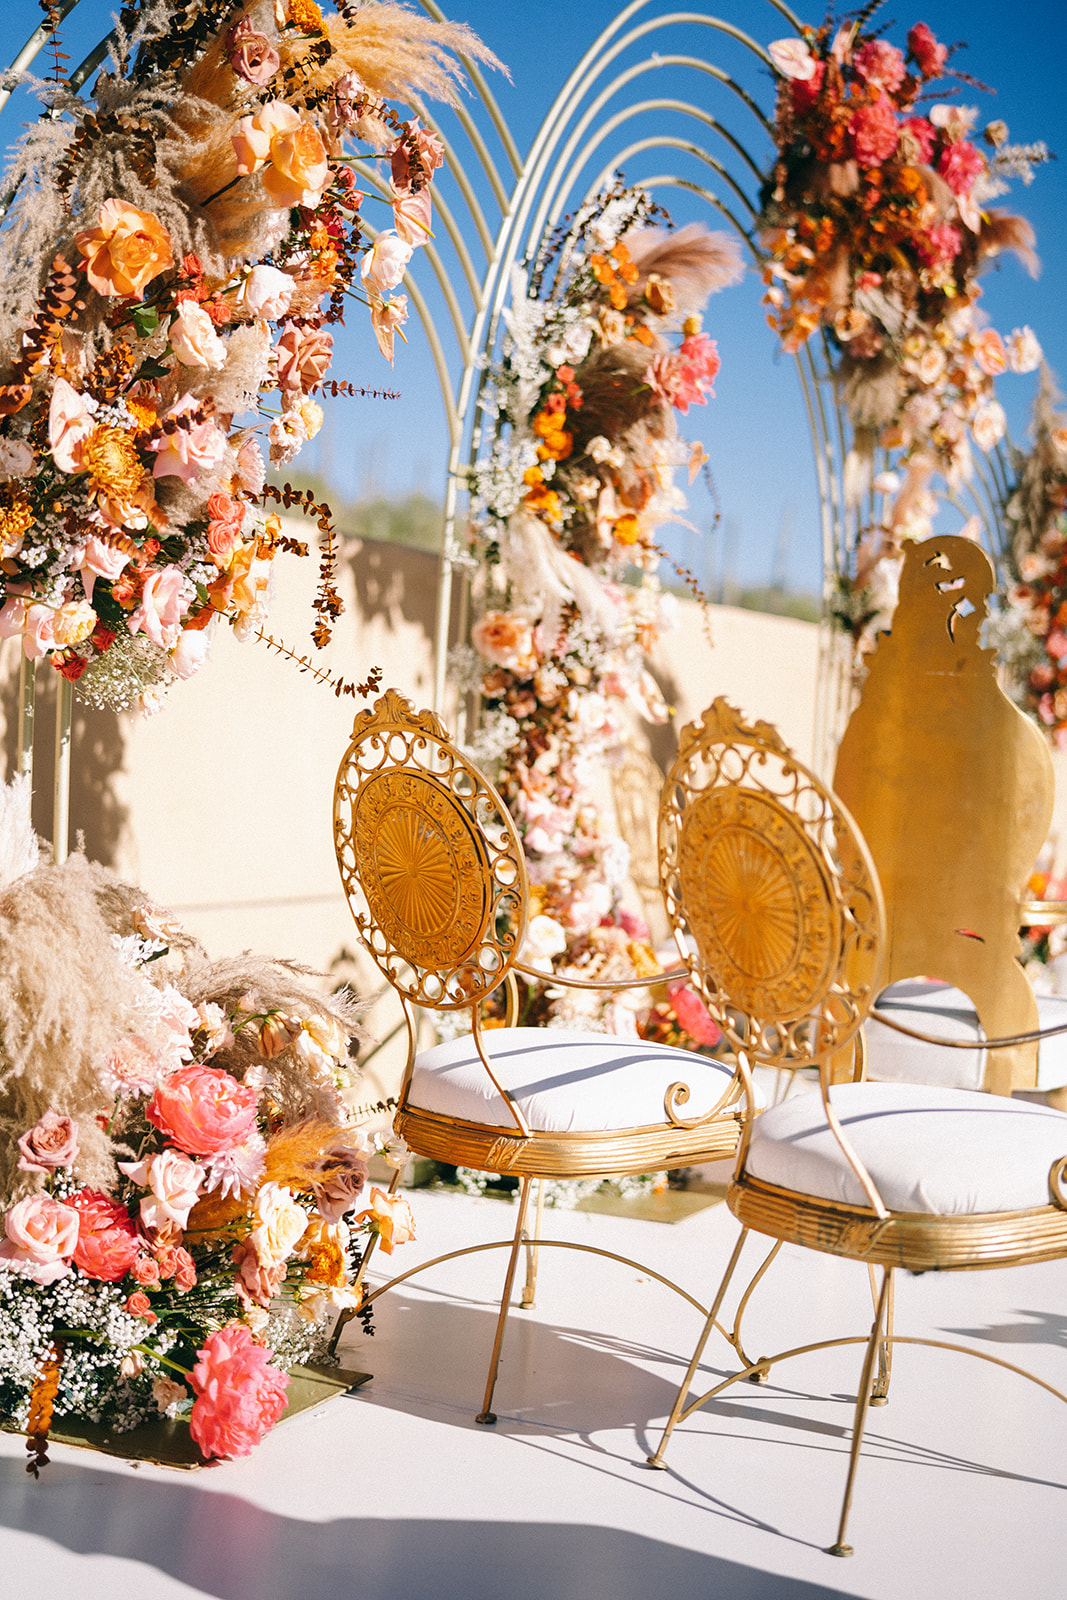 Two delicate golden chairs with white seats in front of flower arches 